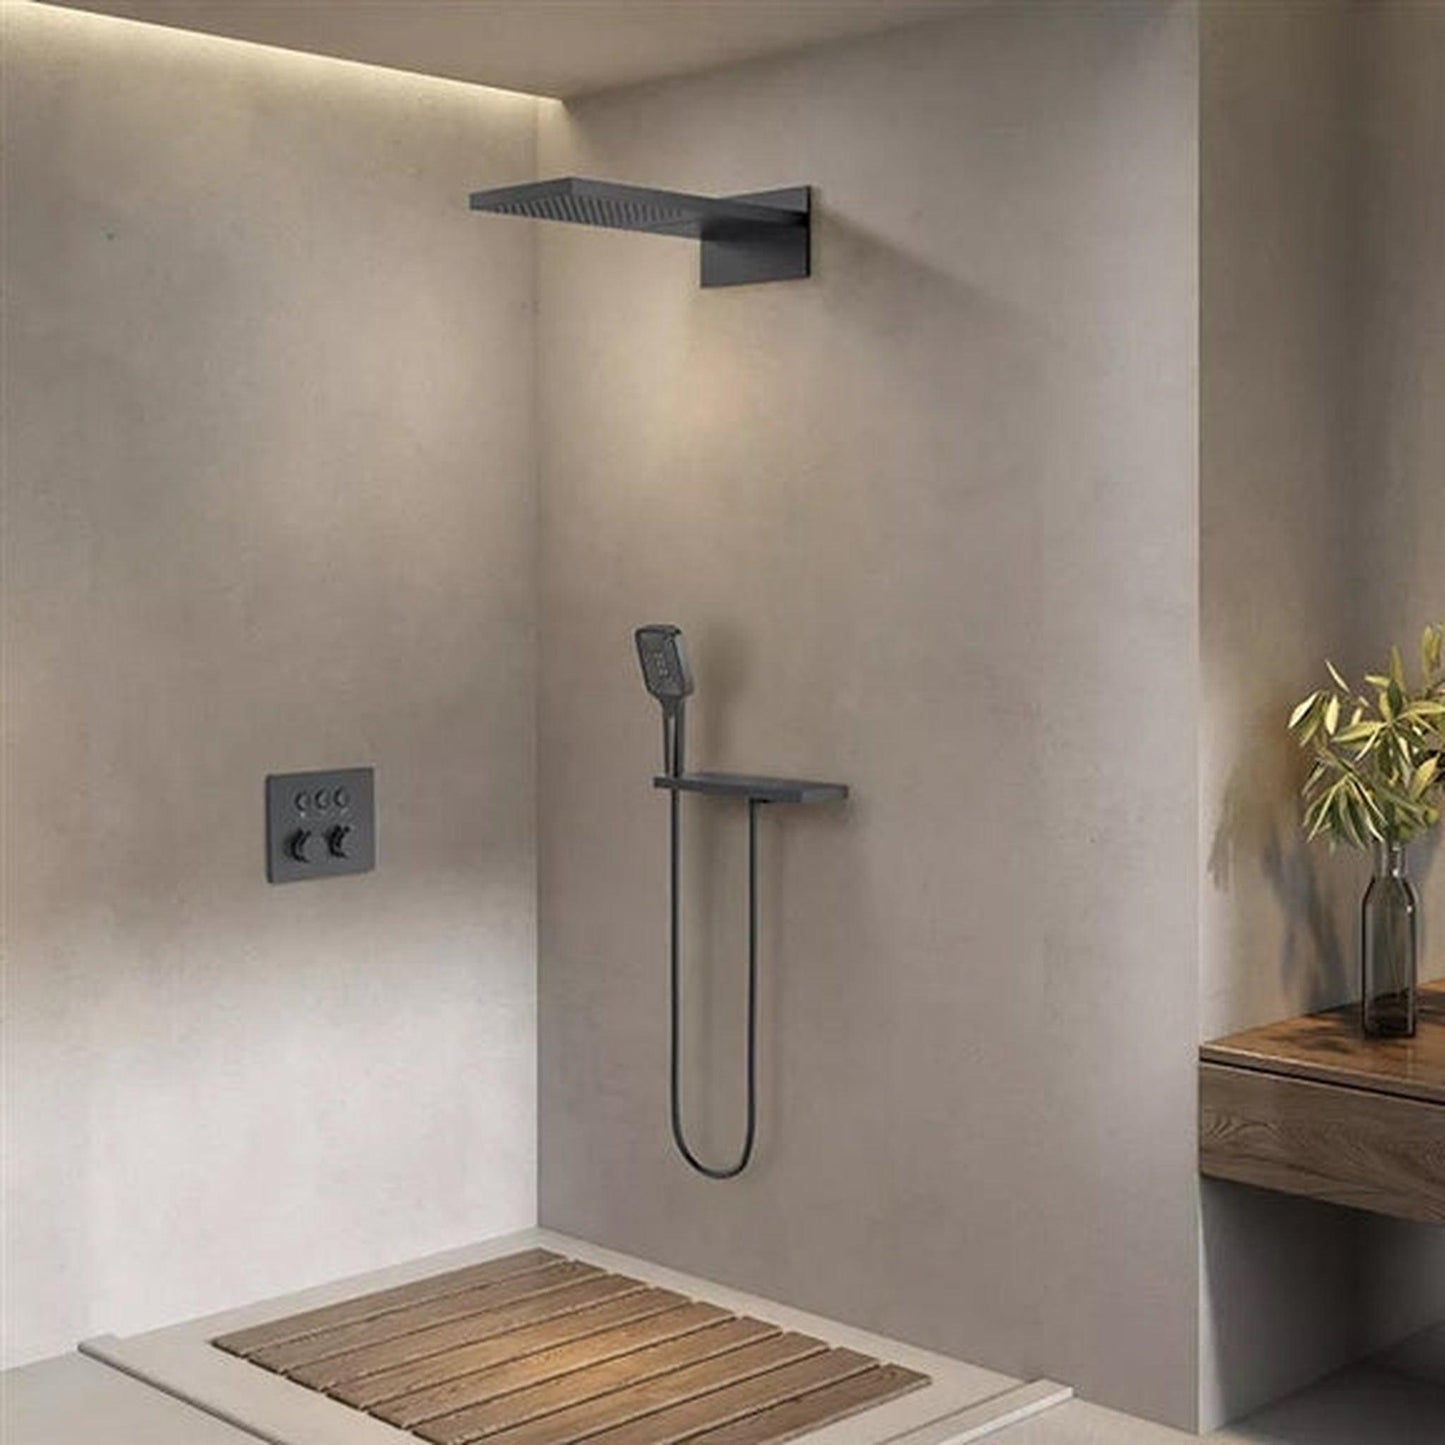 Fontana Trieste Creative Luxury Matte Black Wall-Mounted Thermostatic Rainfall Waterfall Shower System With Hand Shower